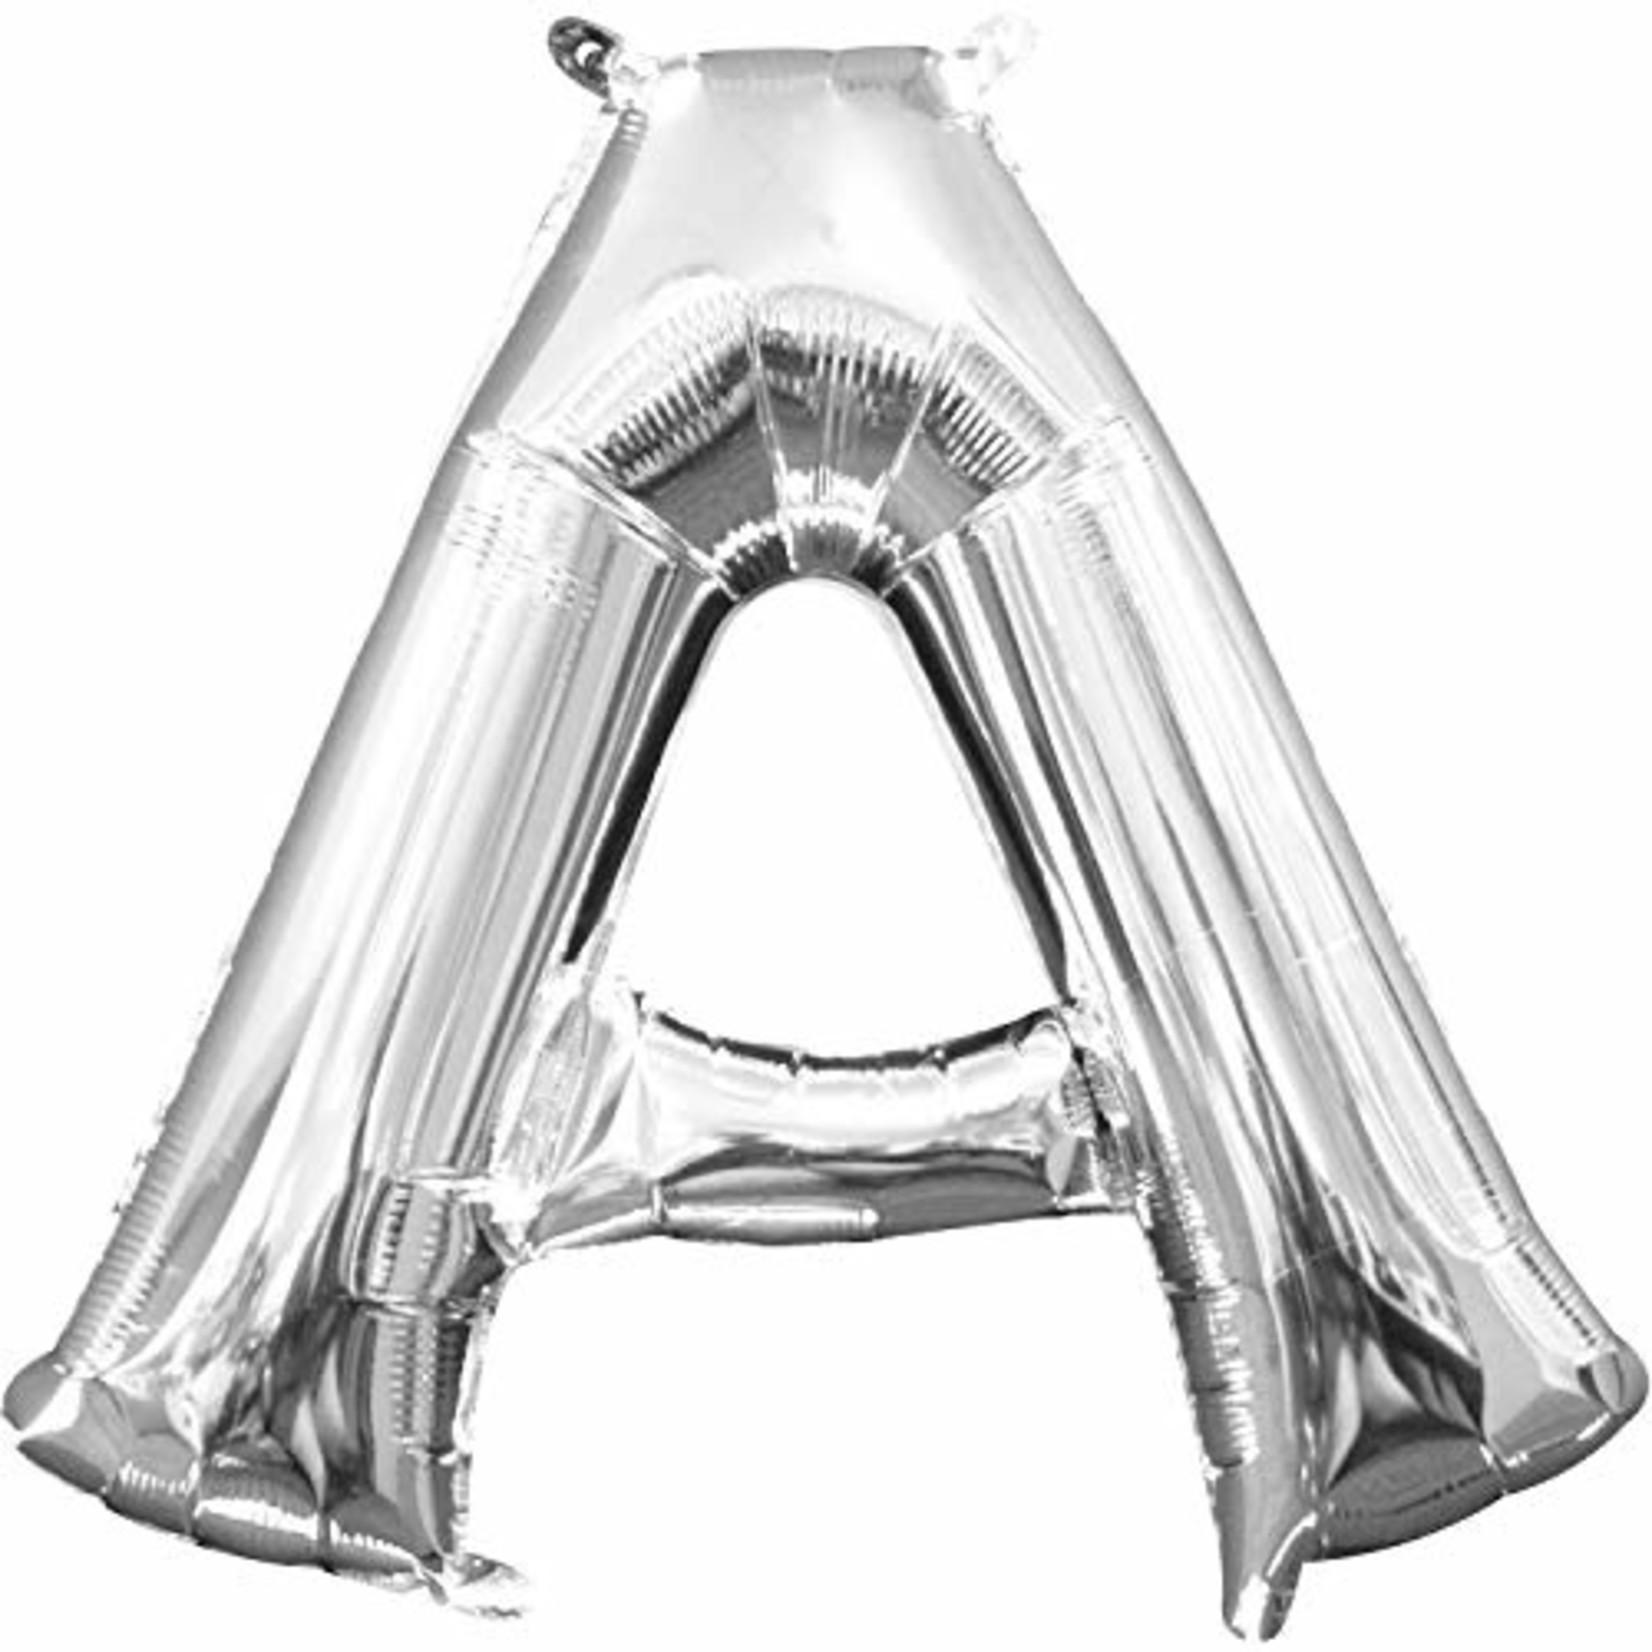 Foil Balloon Air Filled - Letter "A" - Silver - 16"